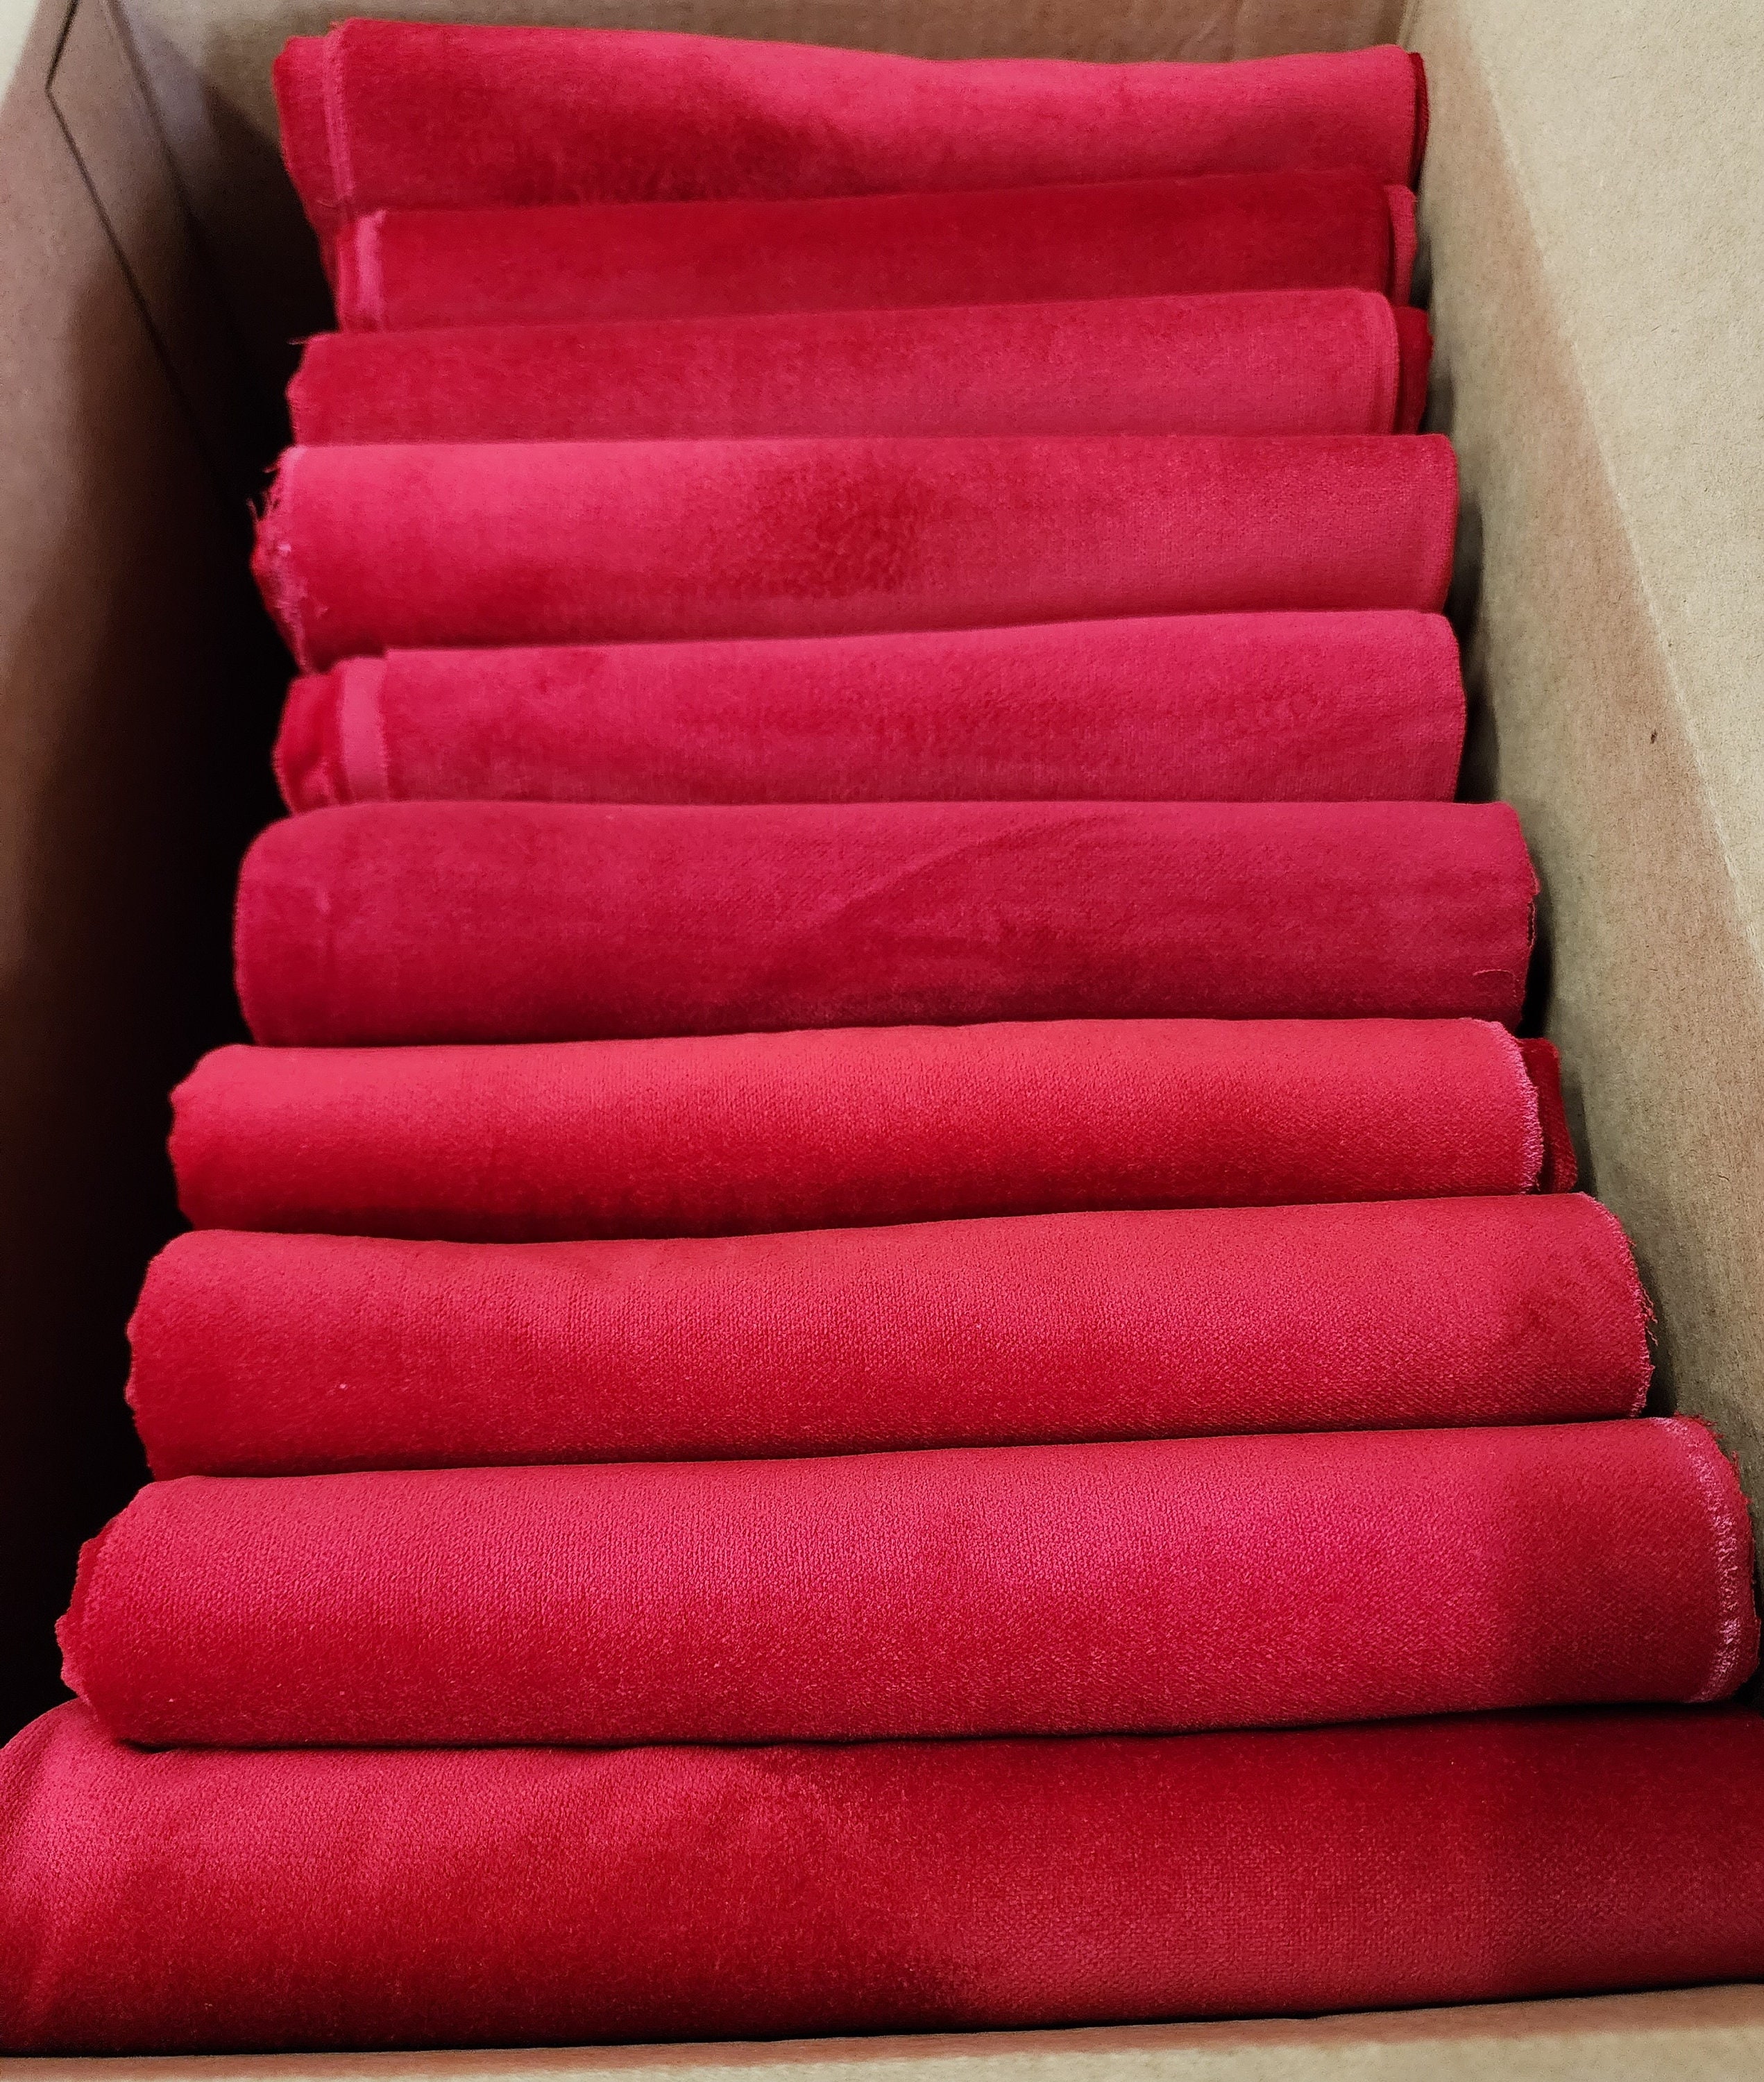 Solid Color Cherry Red Flocking Velvet Fabric Sold by the Yard for